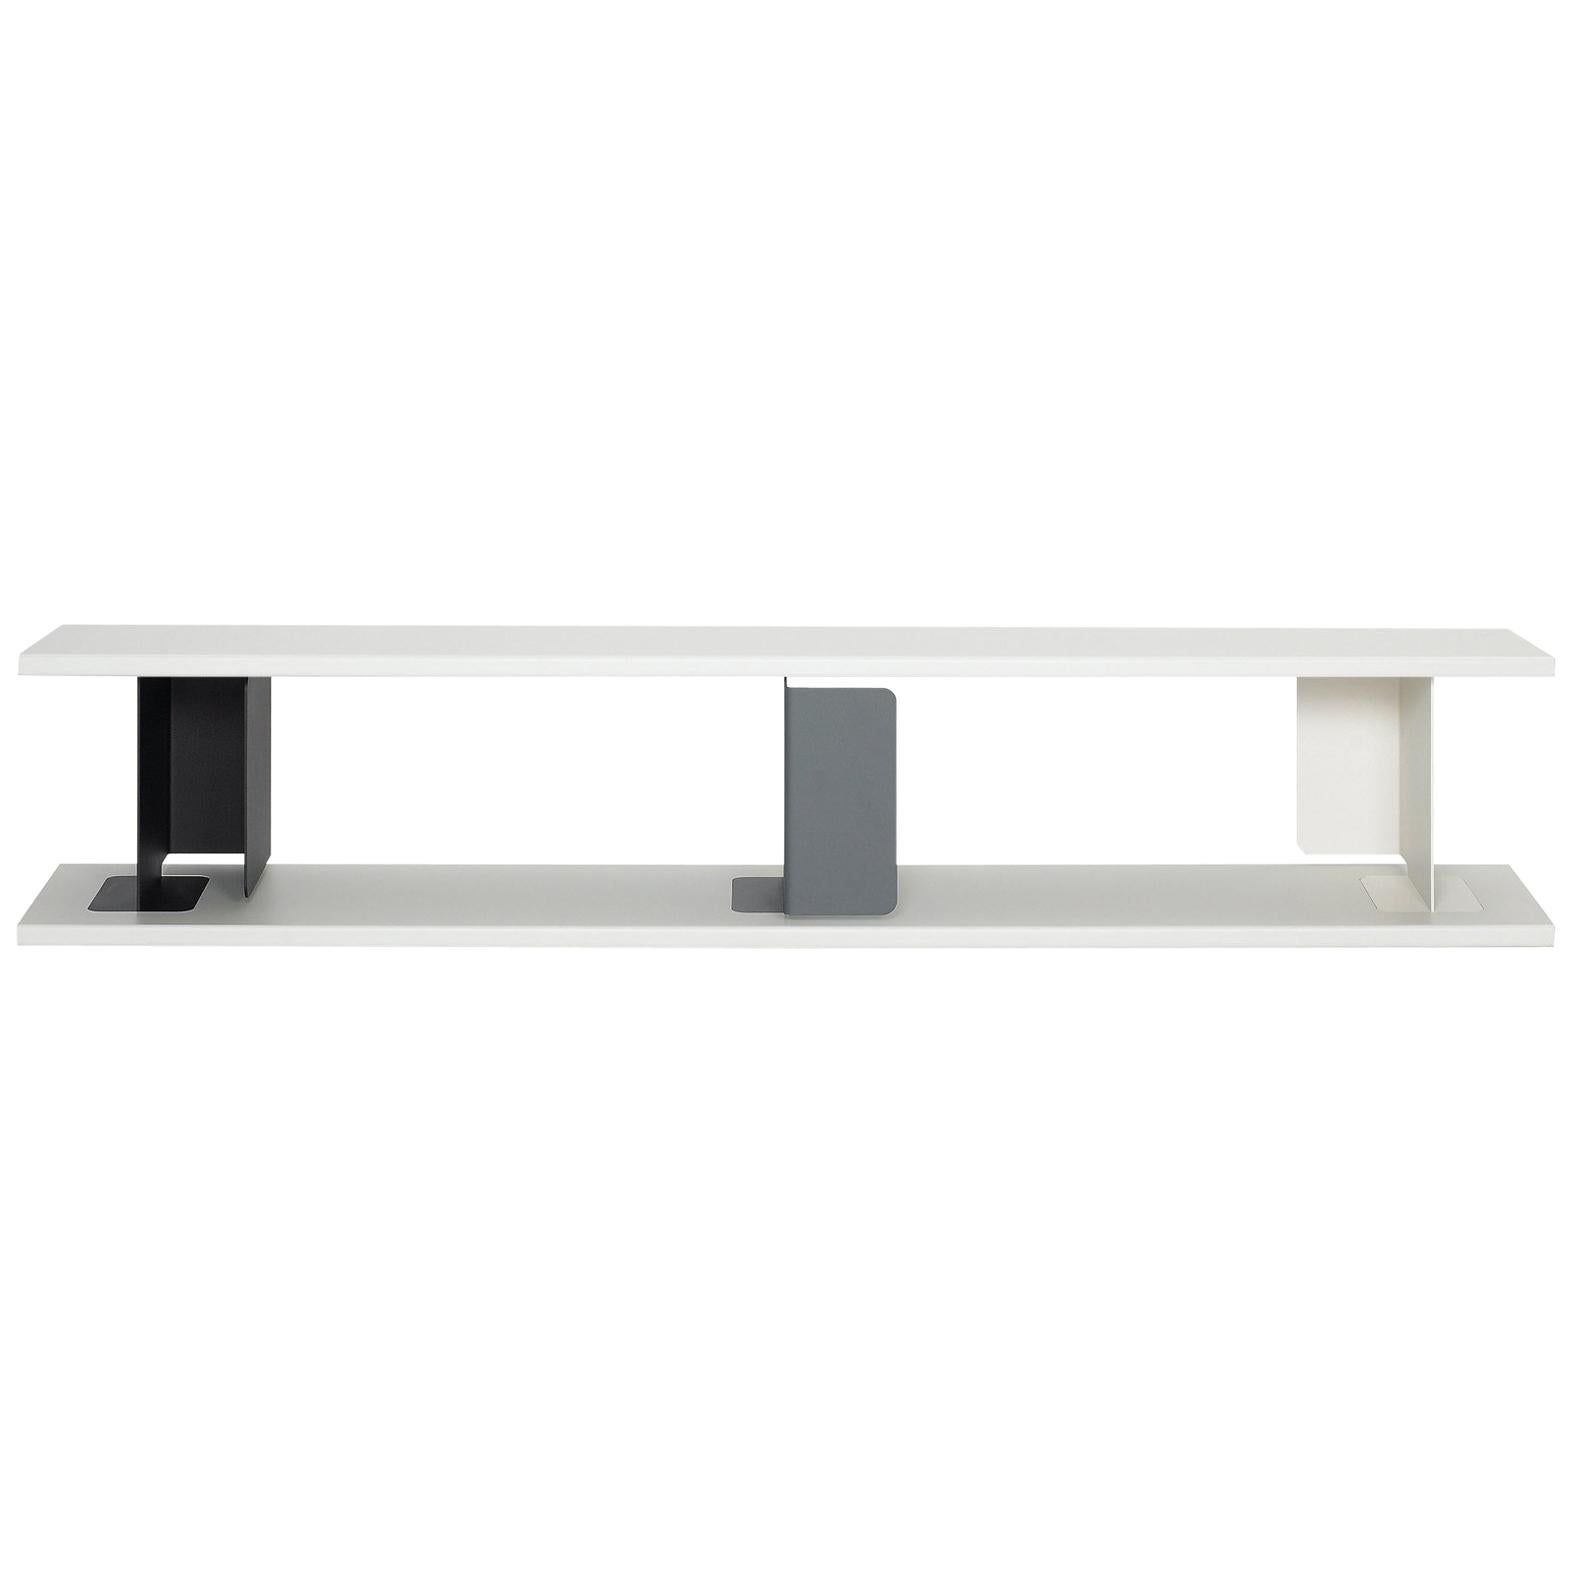 ClassiCon Paris 2 Shelves in Light Grey by E. Barber & J. Osgerby